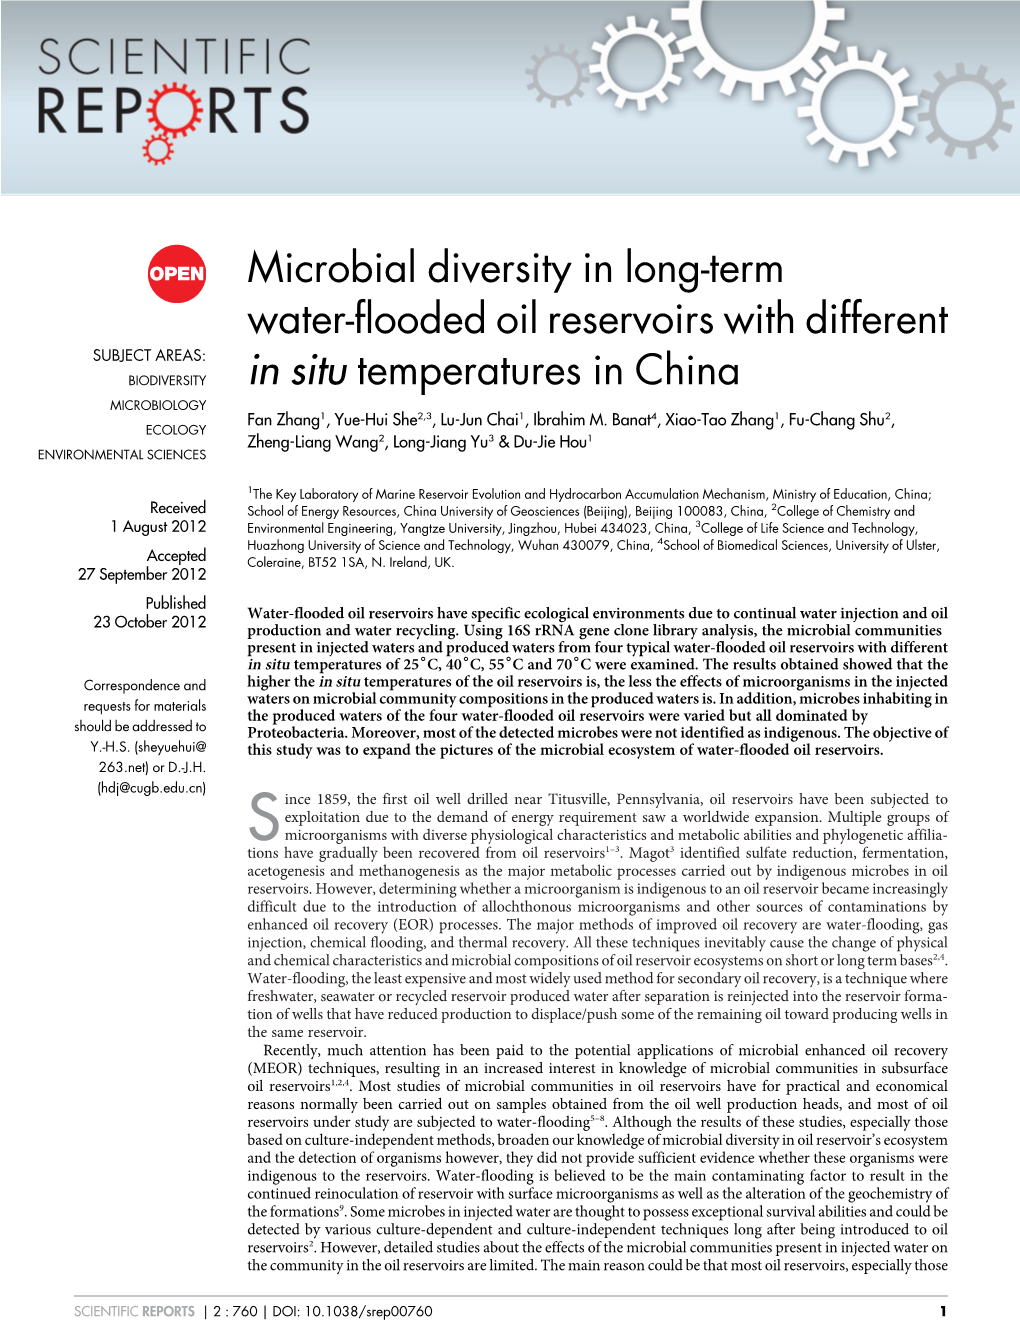 Microbial Diversity in Long-Term Water-Flooded Oil Reservoirs with Different in Situ Temperatures in China